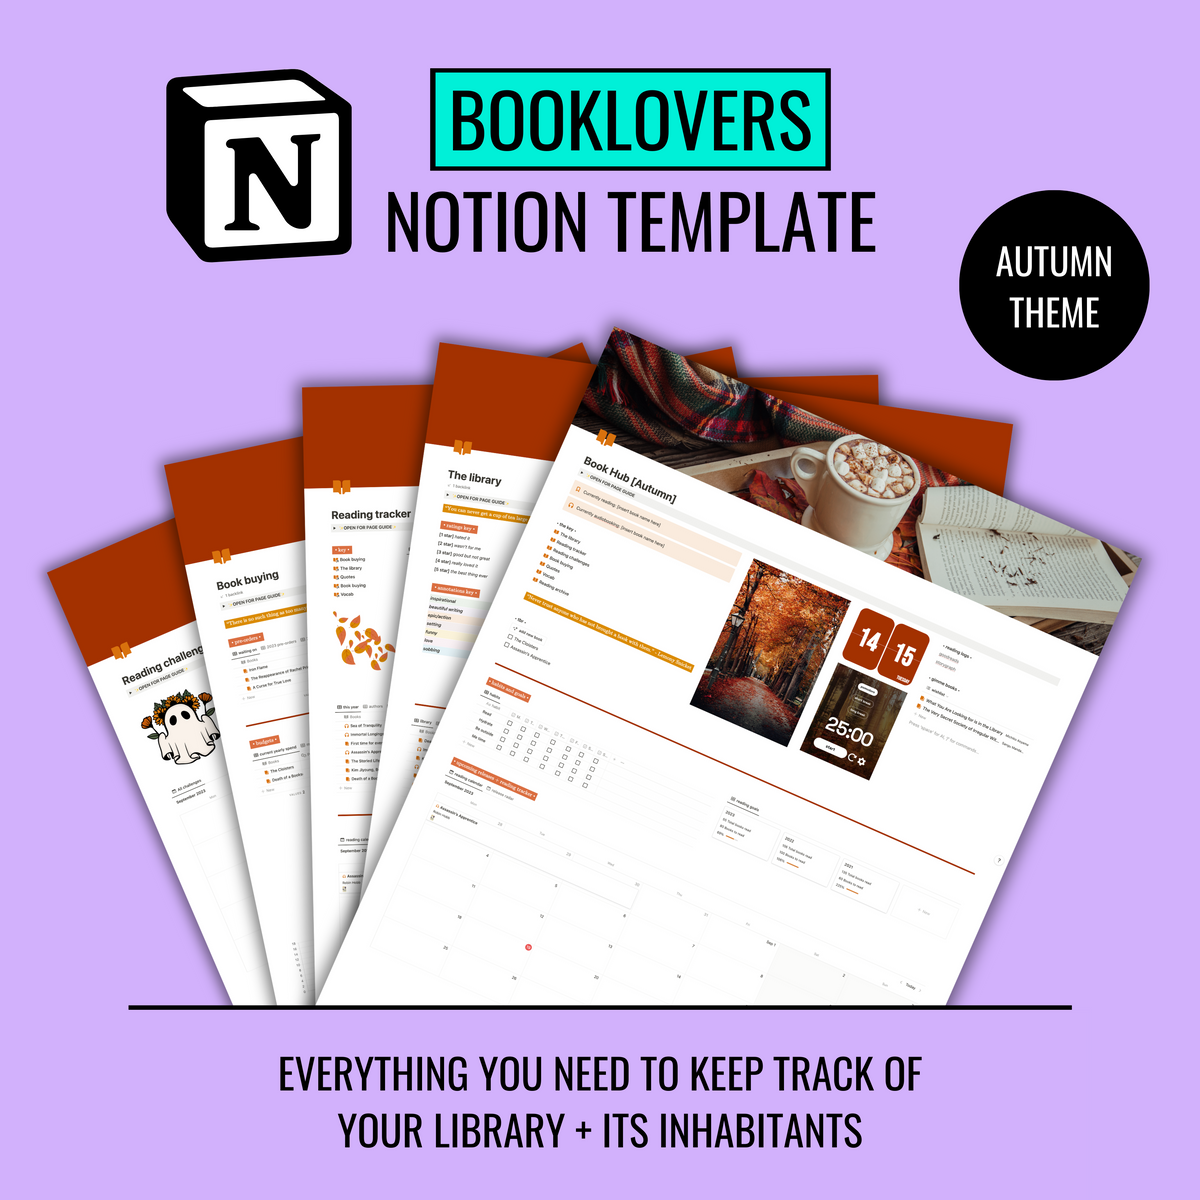 Complete library hub Notion template